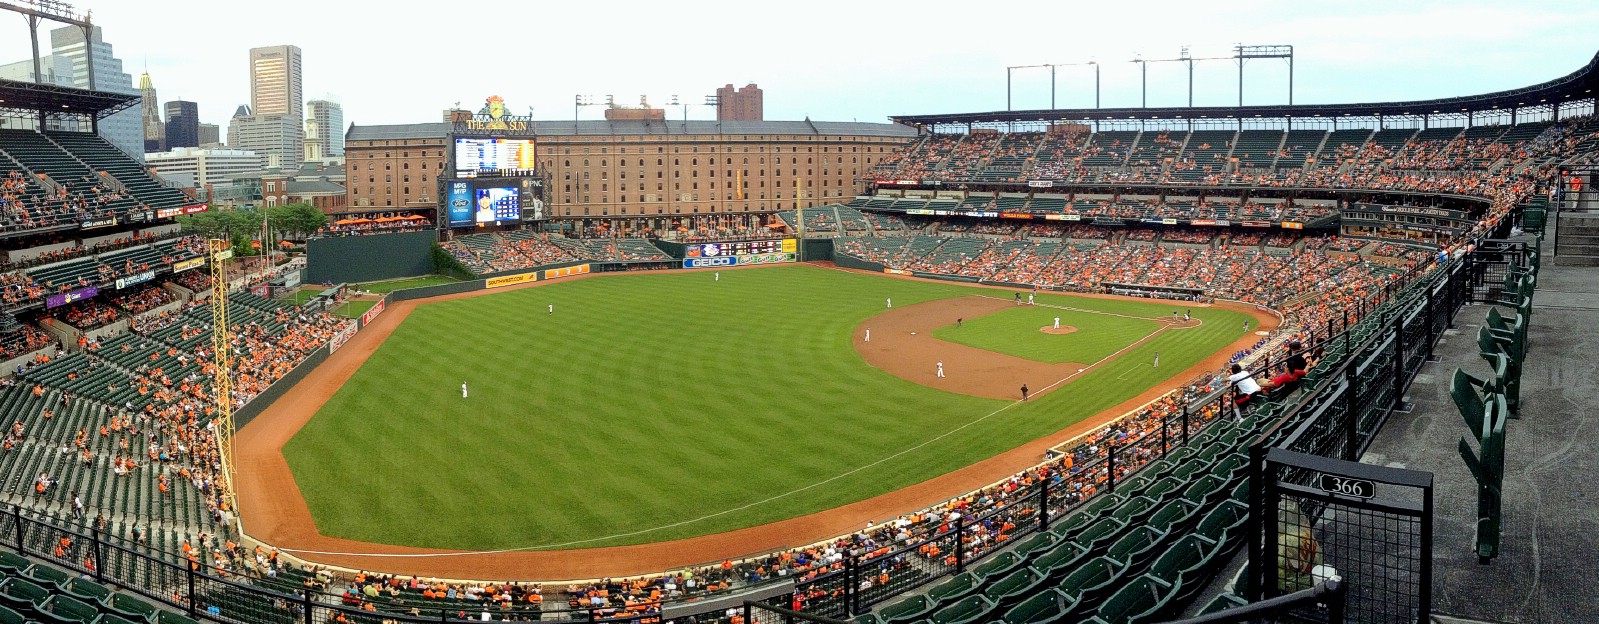 A panorama of Oriole Park at Camden Yards in Baltimore, Maryland, USA. July 9th 2013 (iPod) 